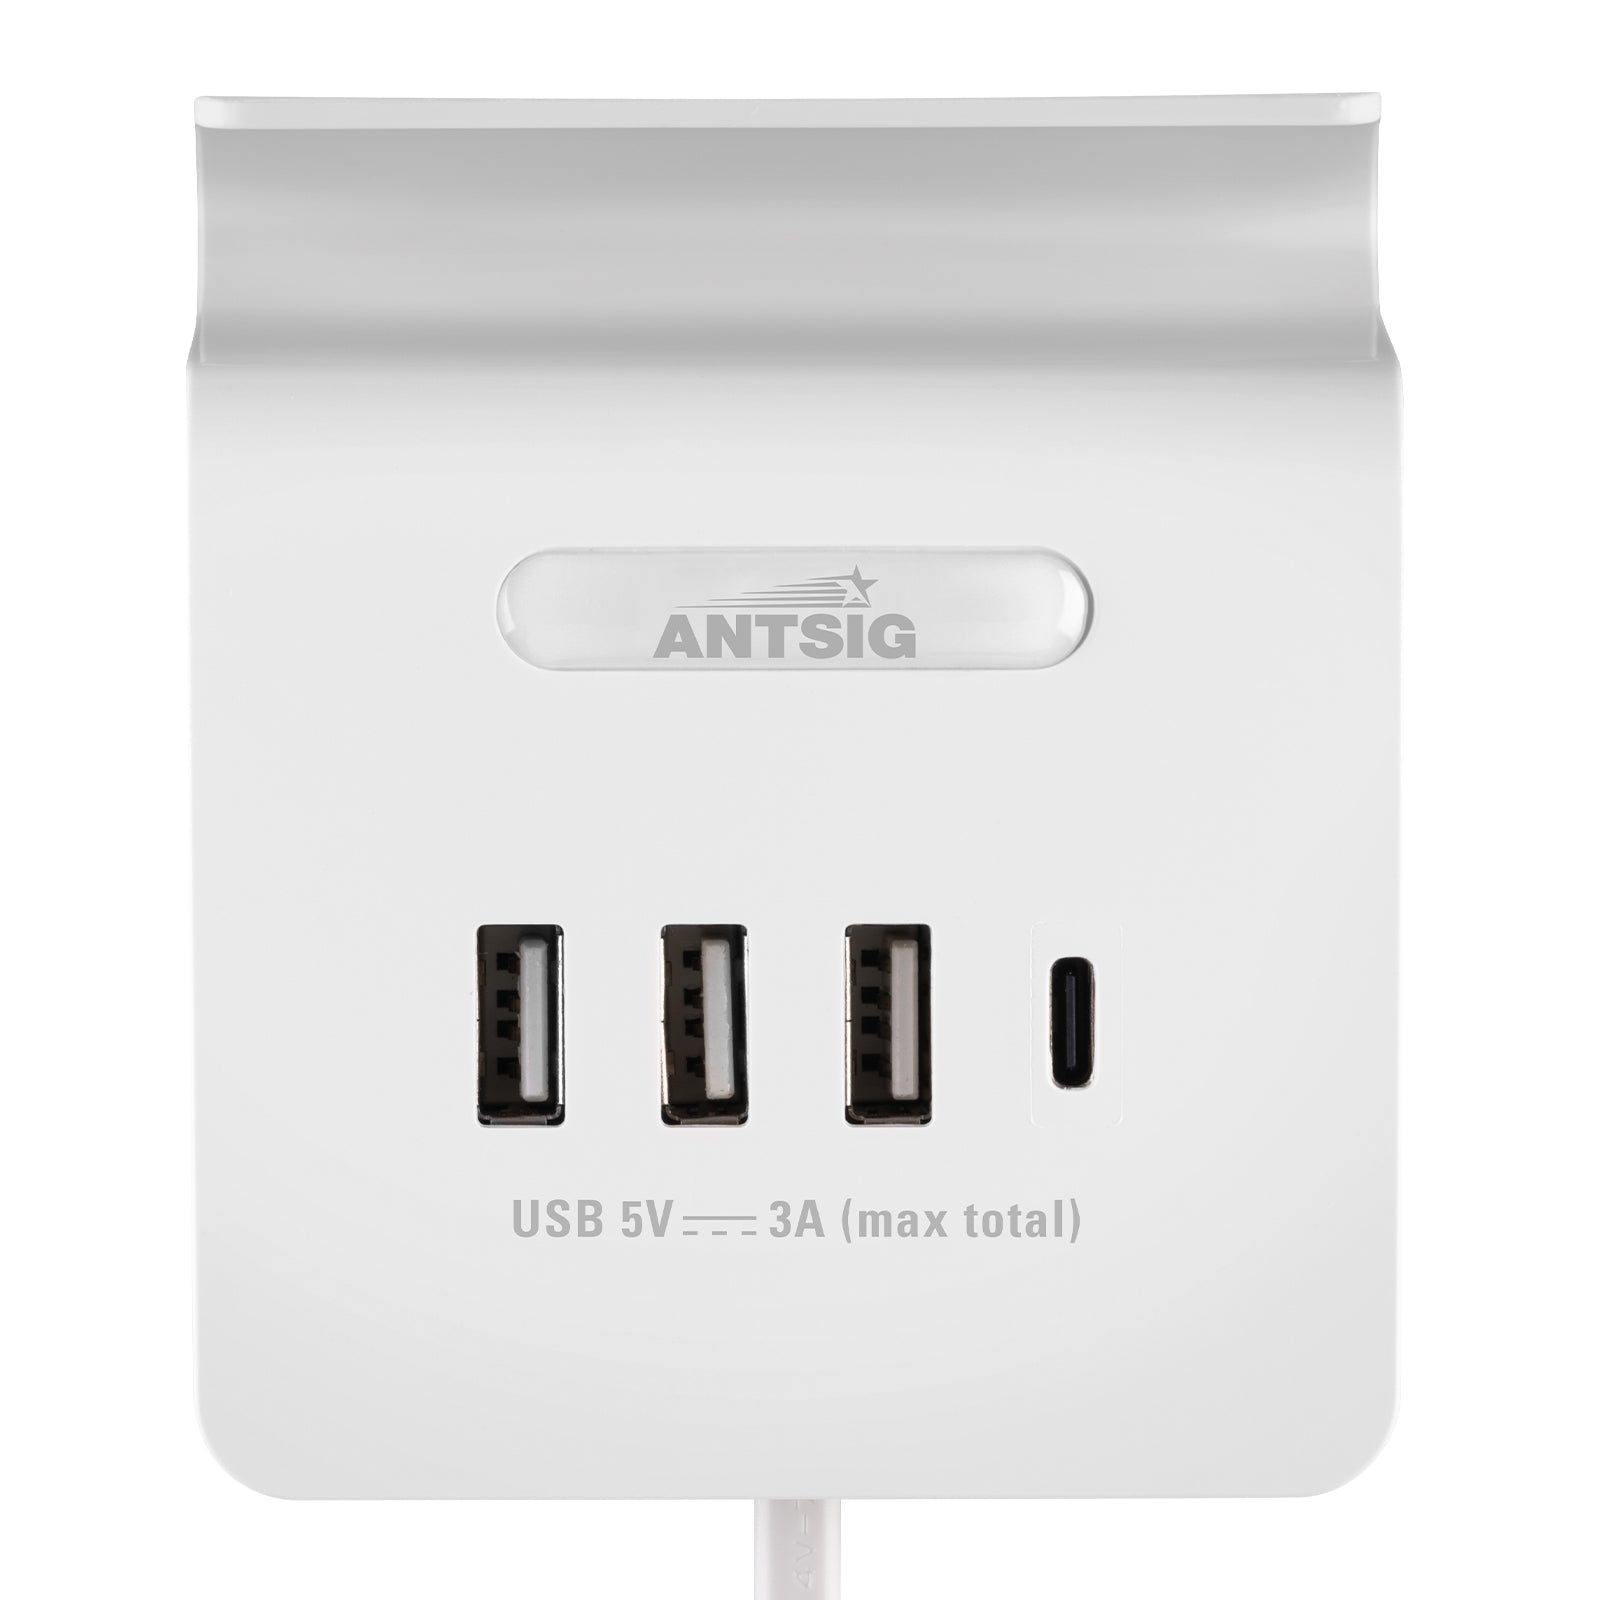 5V 4 Port Compact USB-Charger With Stand